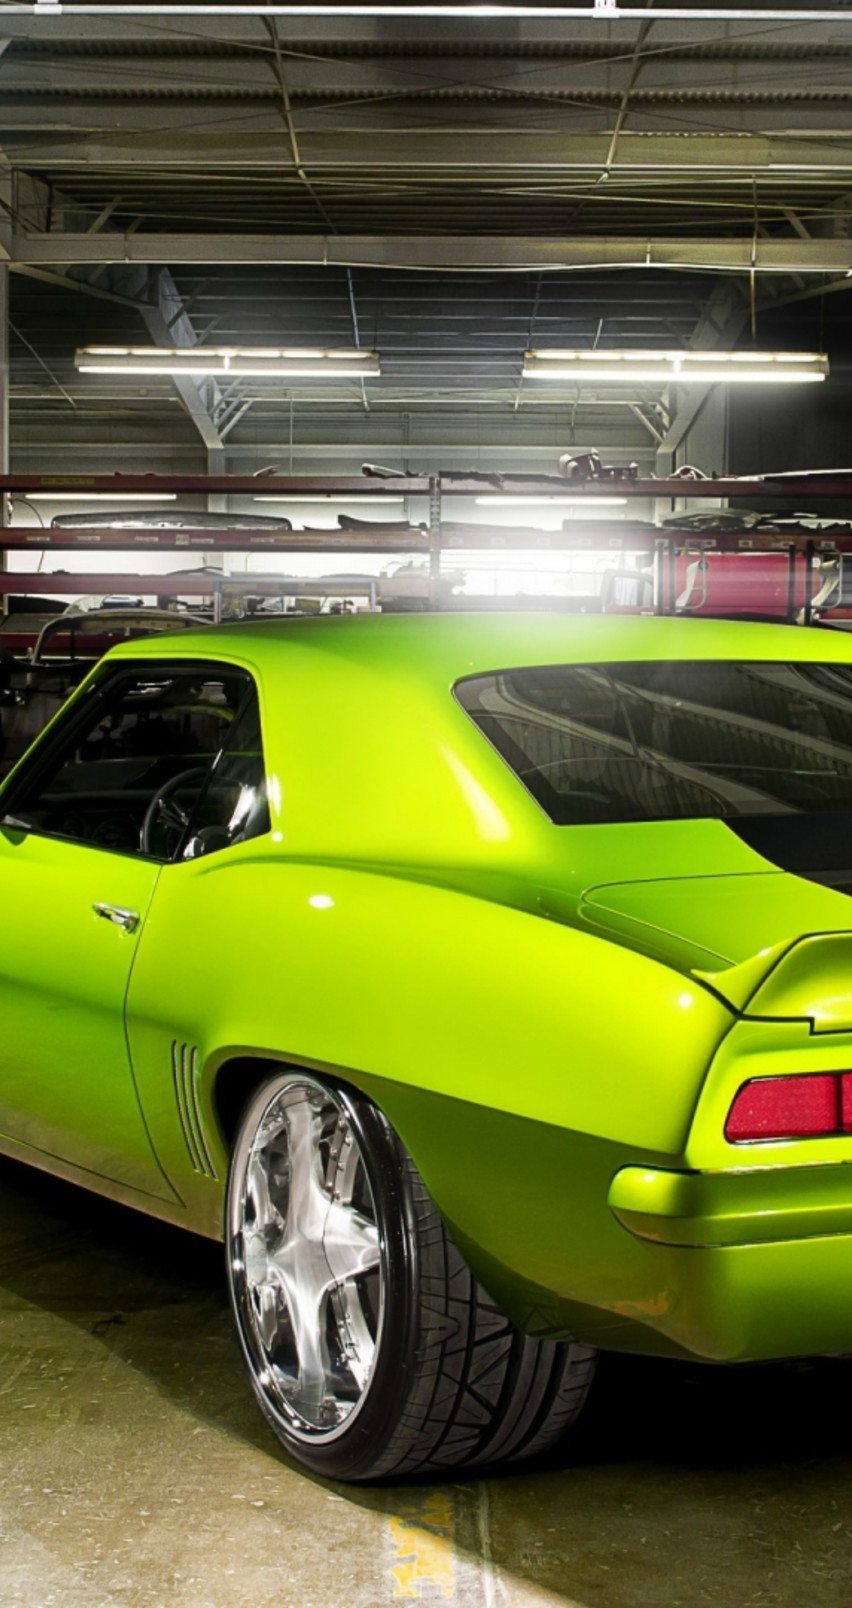 Green Chevrolet Coupe Old Car Wallpaper